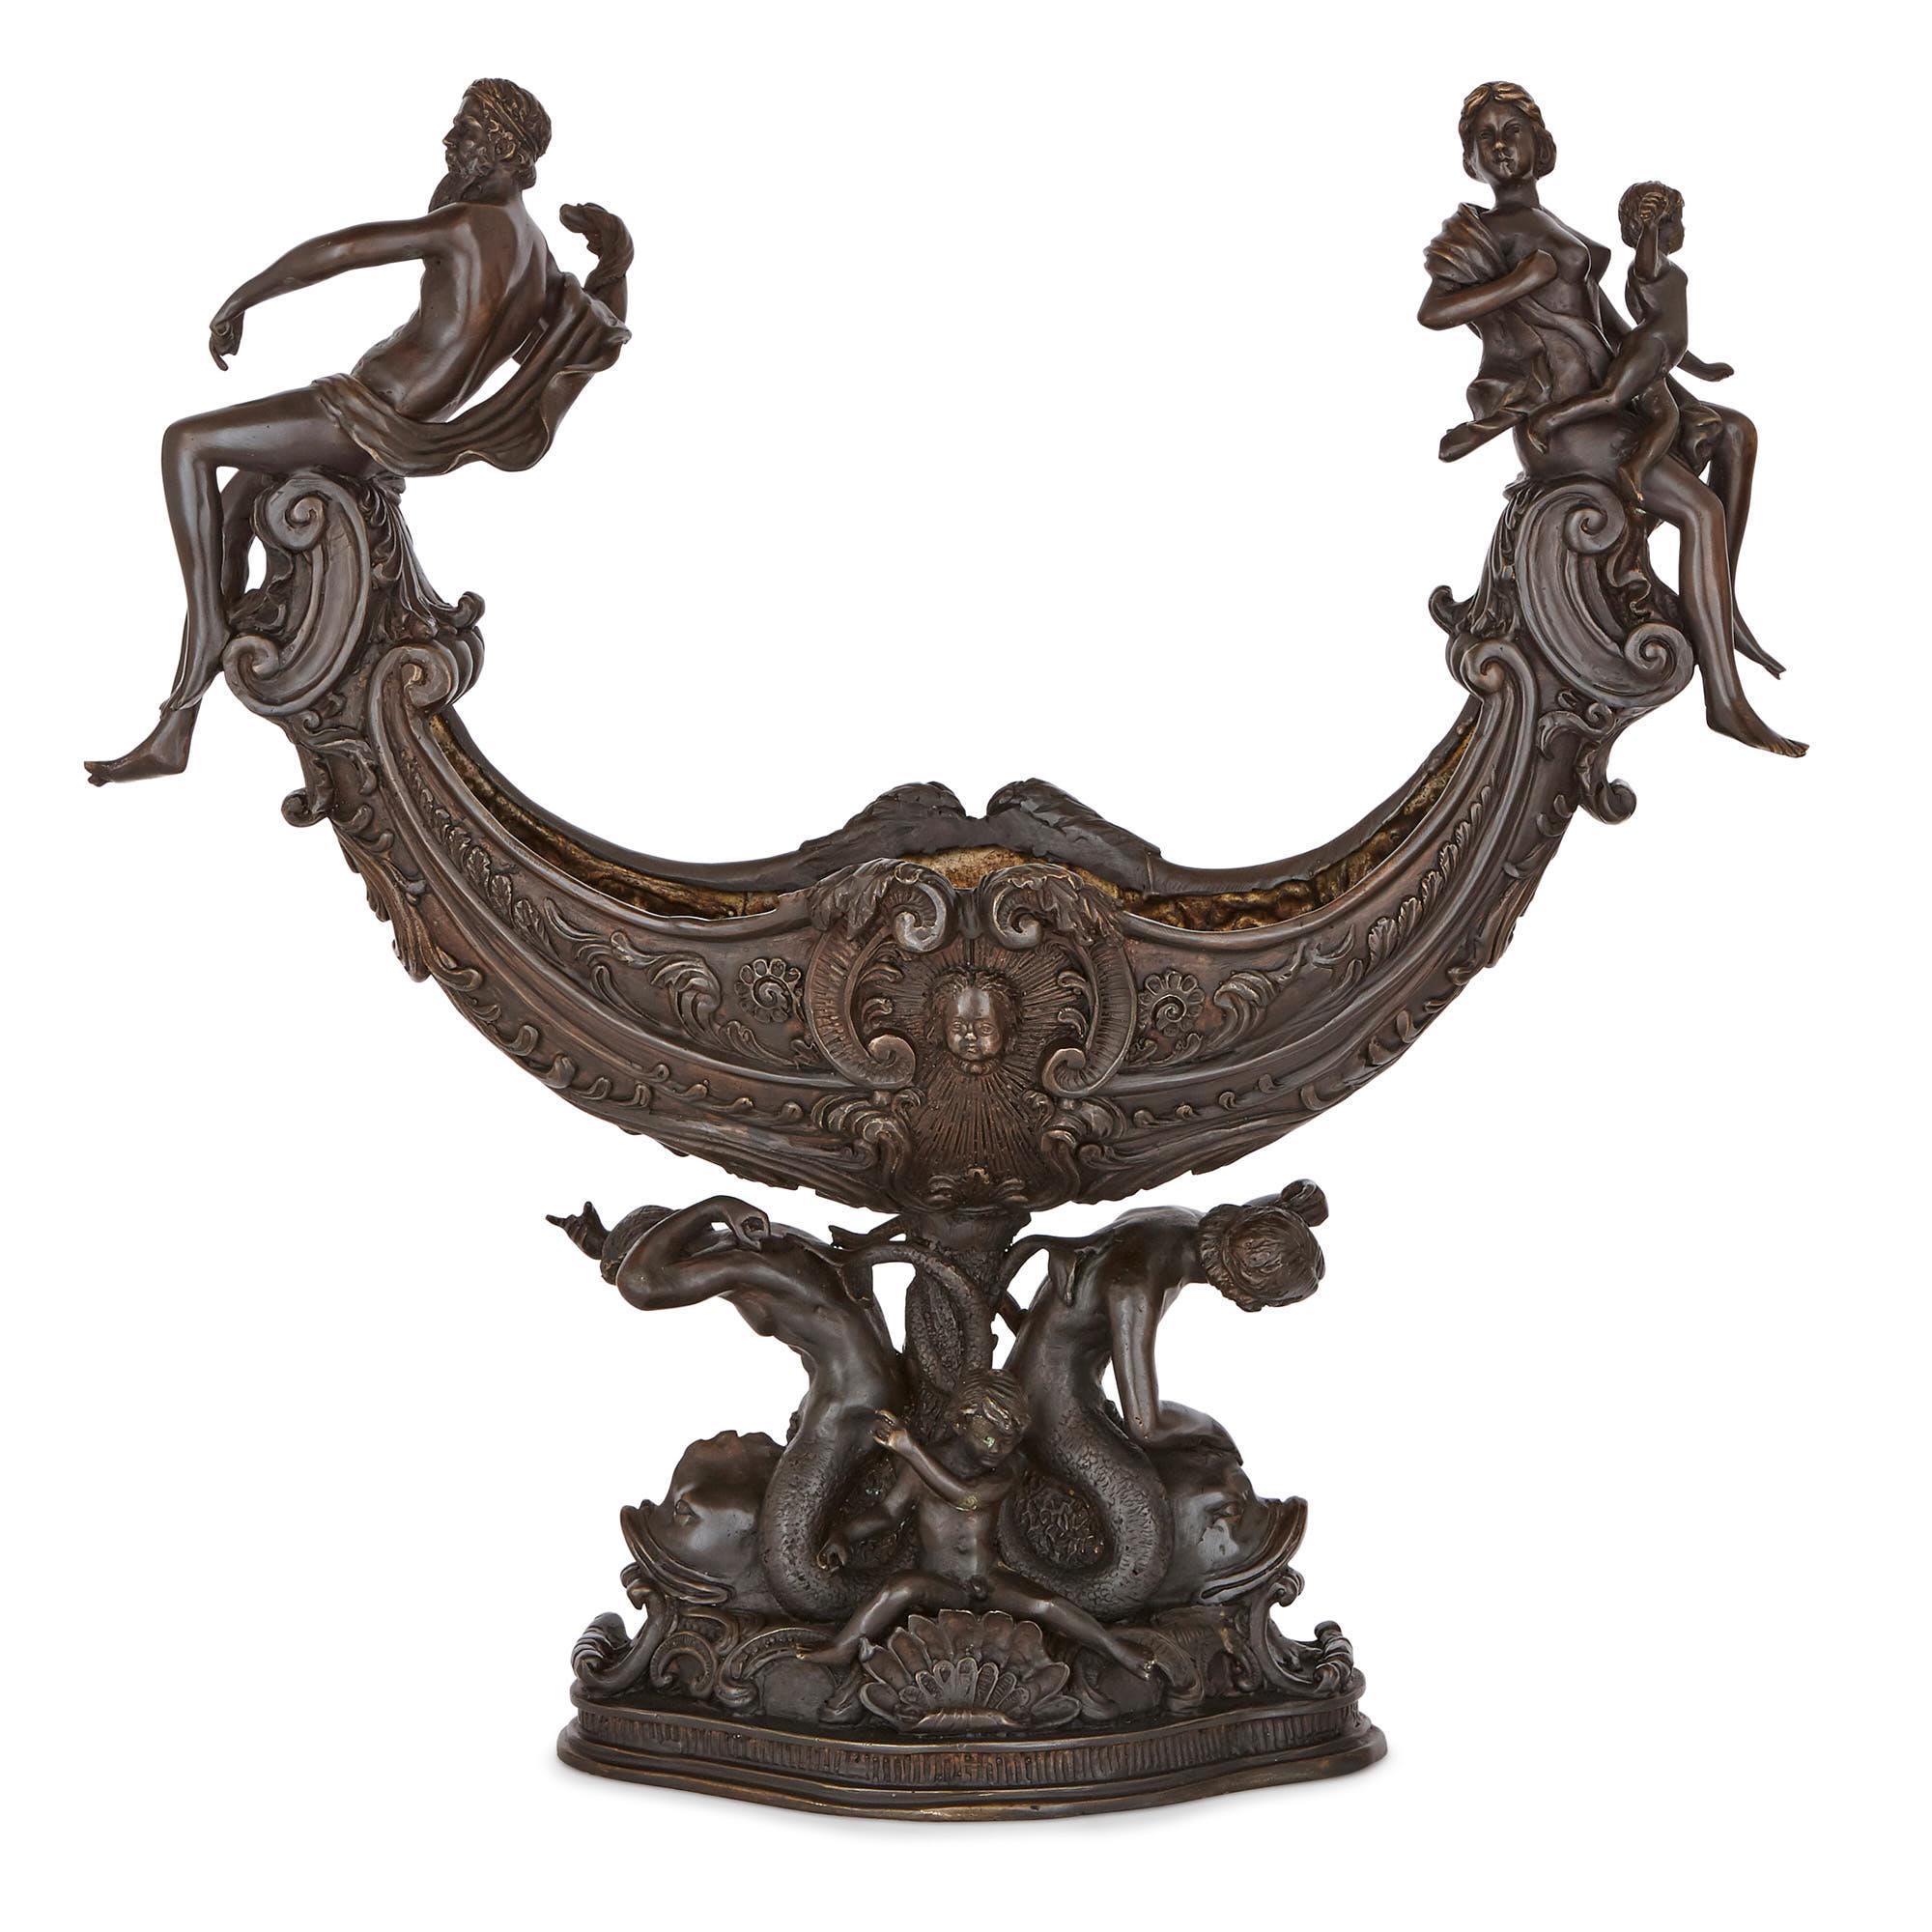 This centrepiece garniture was crafted in the 19th Century in Italy. The two bronzed metal items are identically designed, in an expressive and classically-inspired late Renaissance style. 

The items take the form of U-shaped, ship-like vessels,